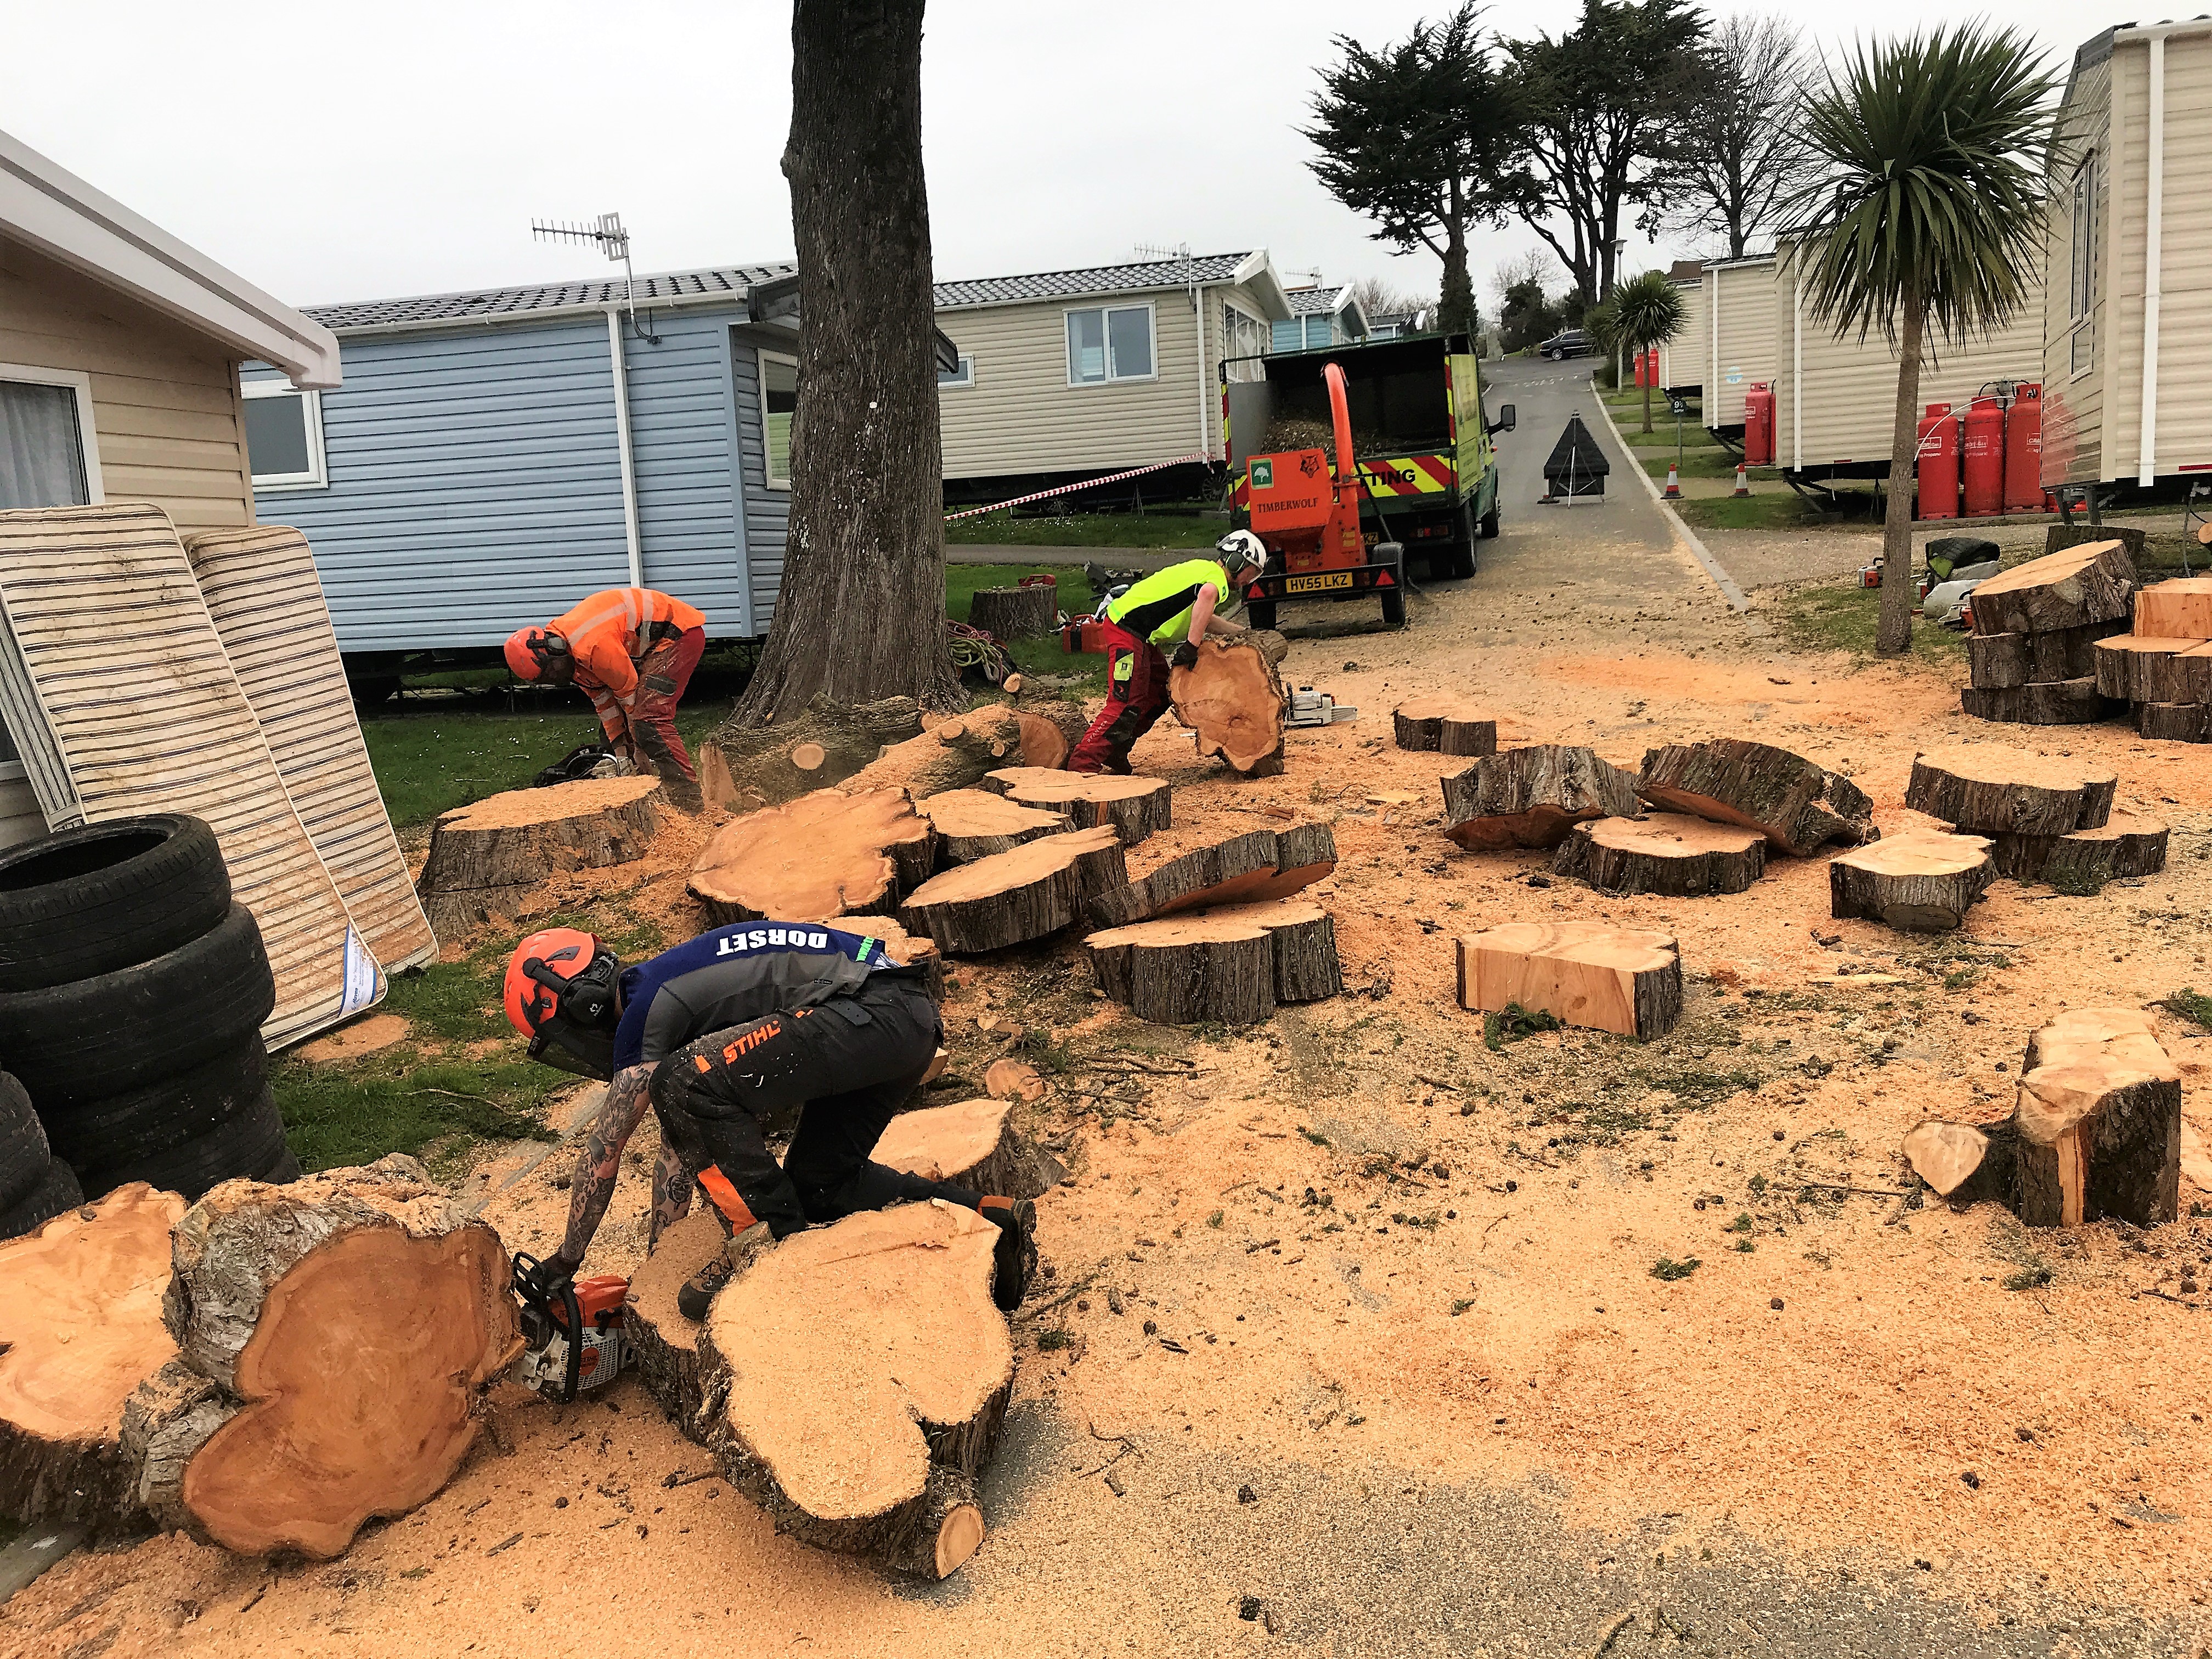 Weymouth Tree Surgeon - Emergency Tree Surgery, Hedge, trimming, reduction, removal and stump grinding service.